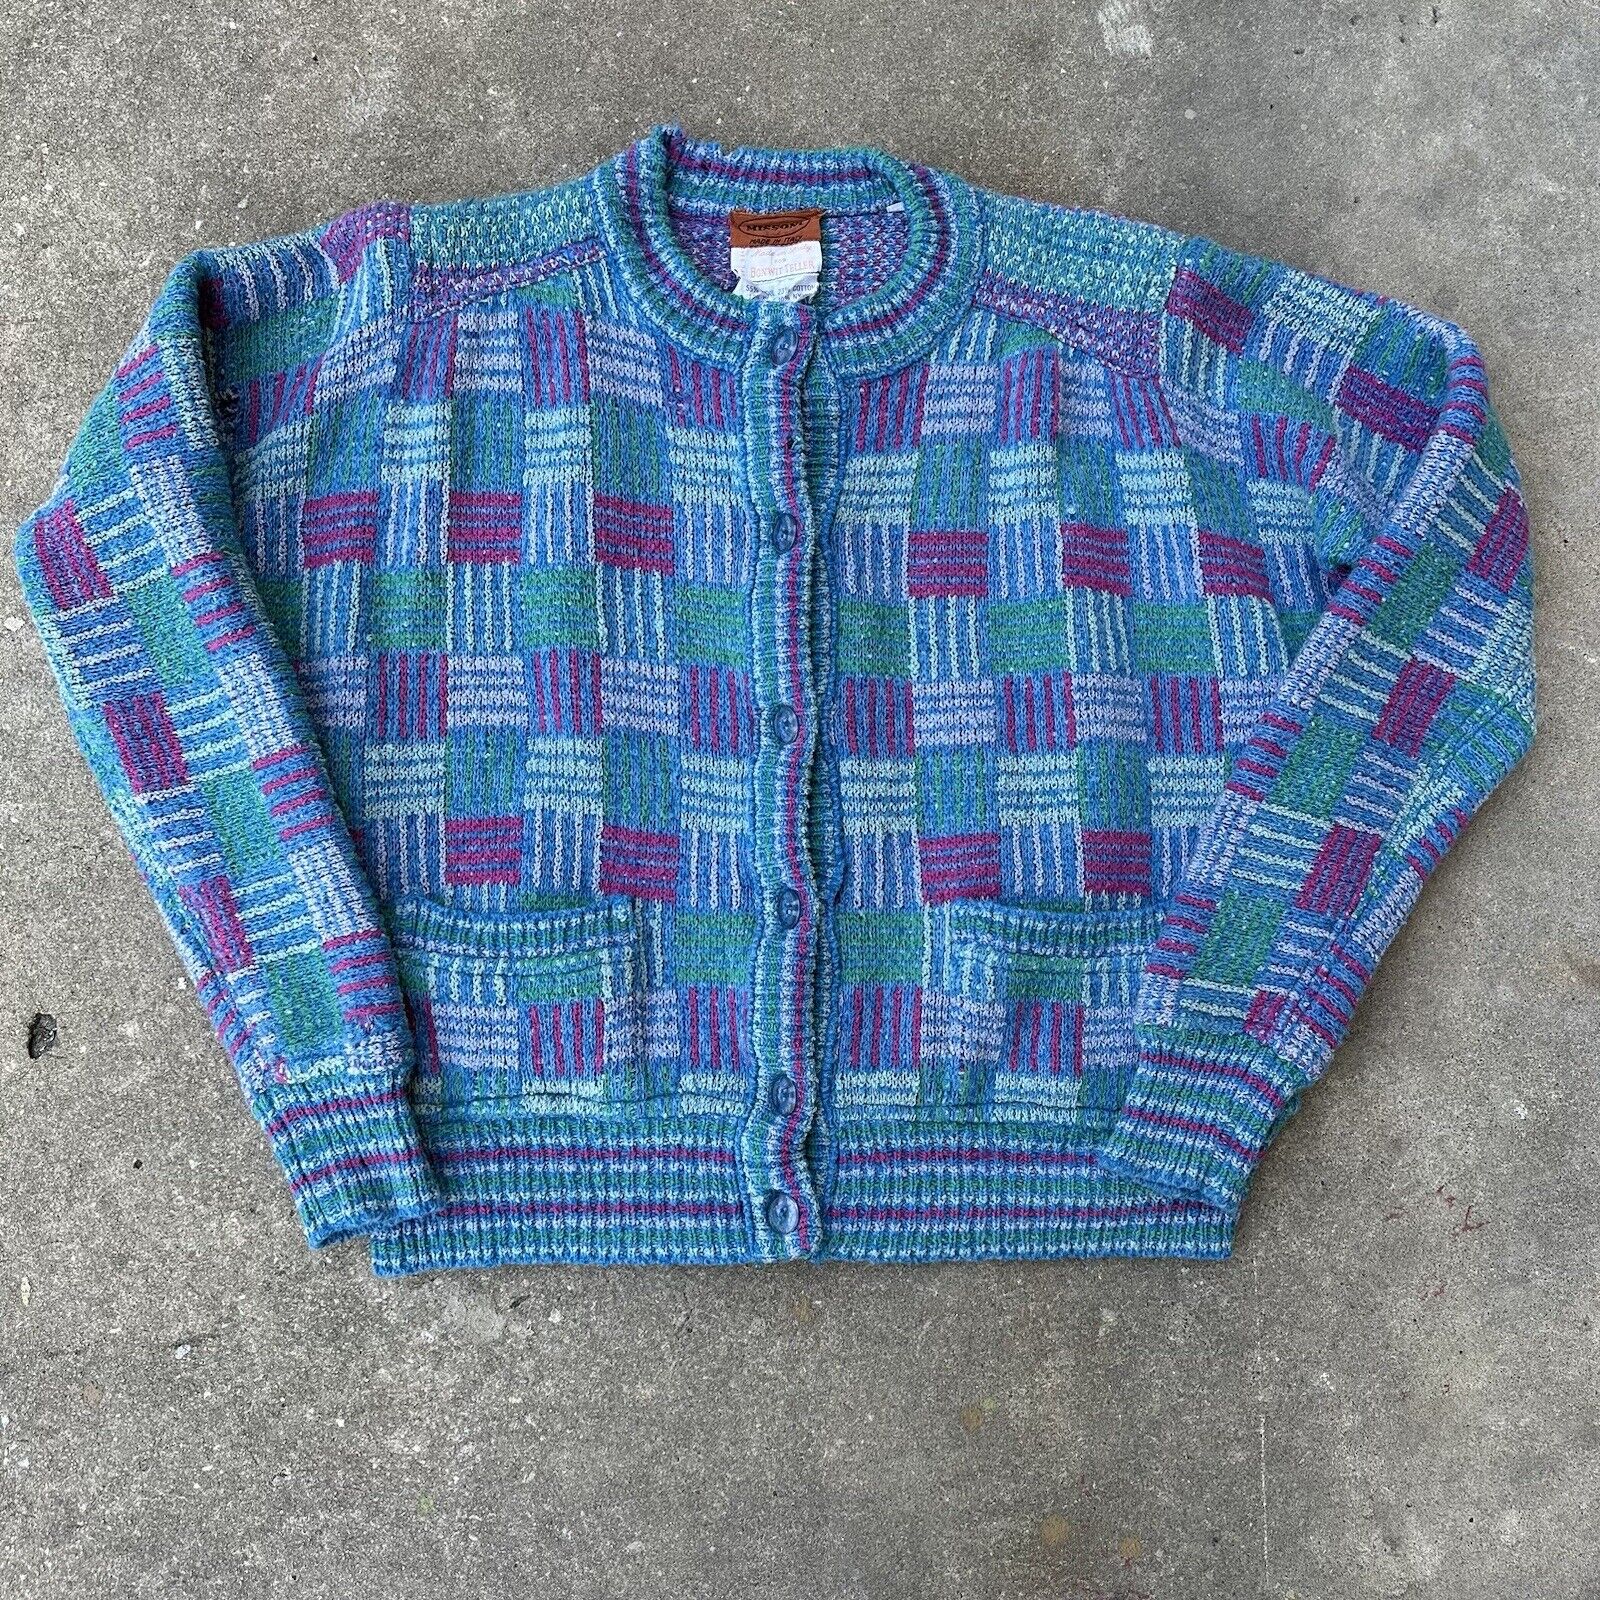 Vintage Missoni For Bonwit Teller Knit Cardigan Sweater 1980s Made In Italy Wool